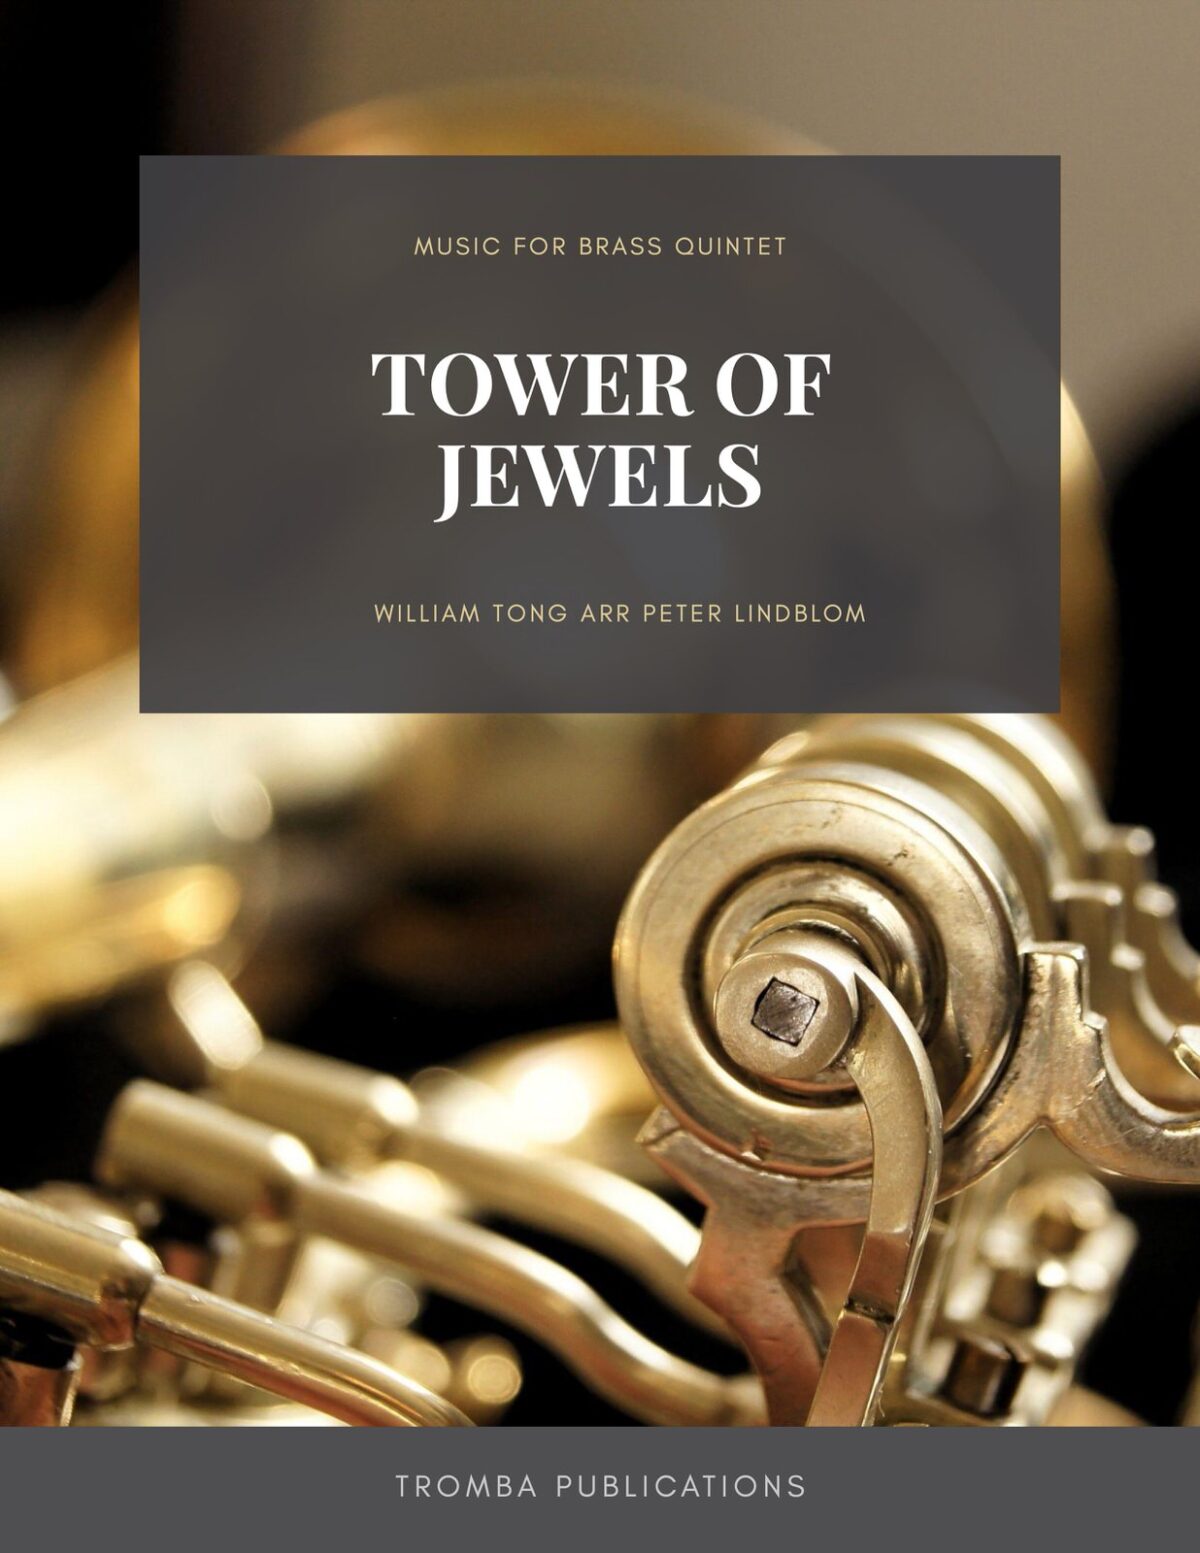 Tower of Jewels for Brass Quintet